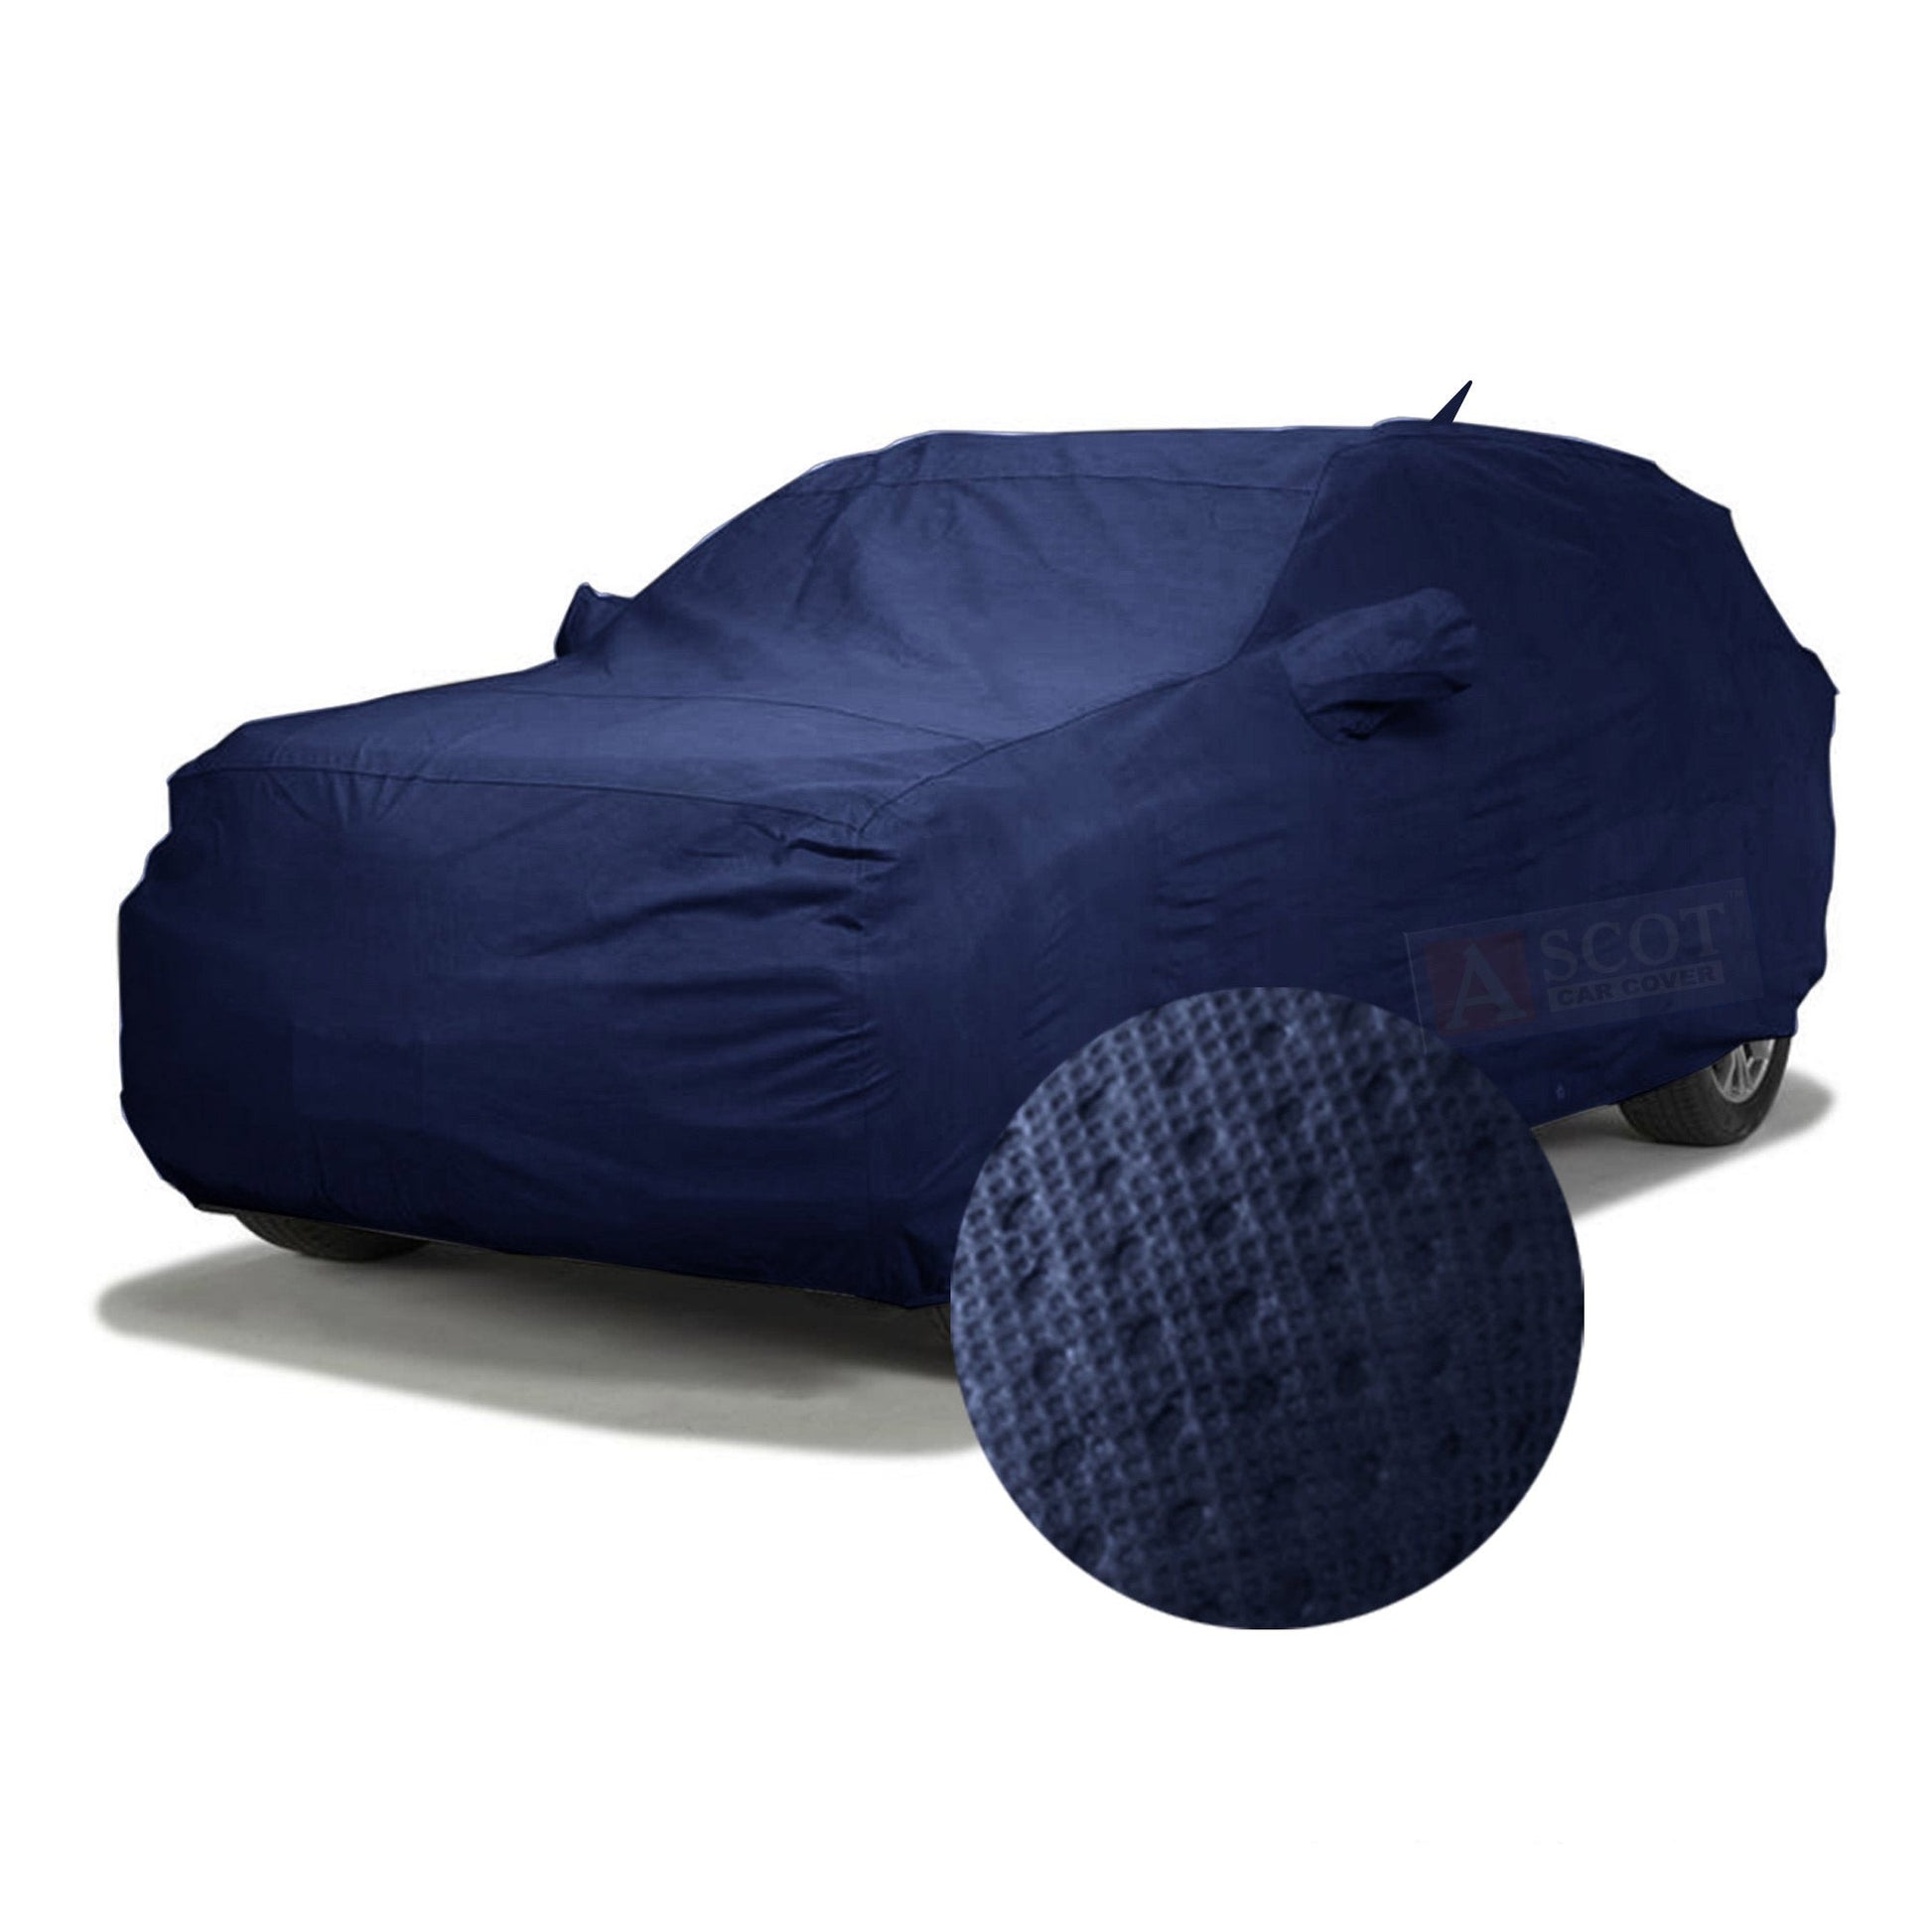  Waterproof Car Cover Compatible with Hyundai I10 I20 I30 I40  Ix20 Ix35 Genesis All Weather Full Car Cover Windproof Dustproof UV  Protection Scratch Resistant (Color : B, Size : I30) : Automotive